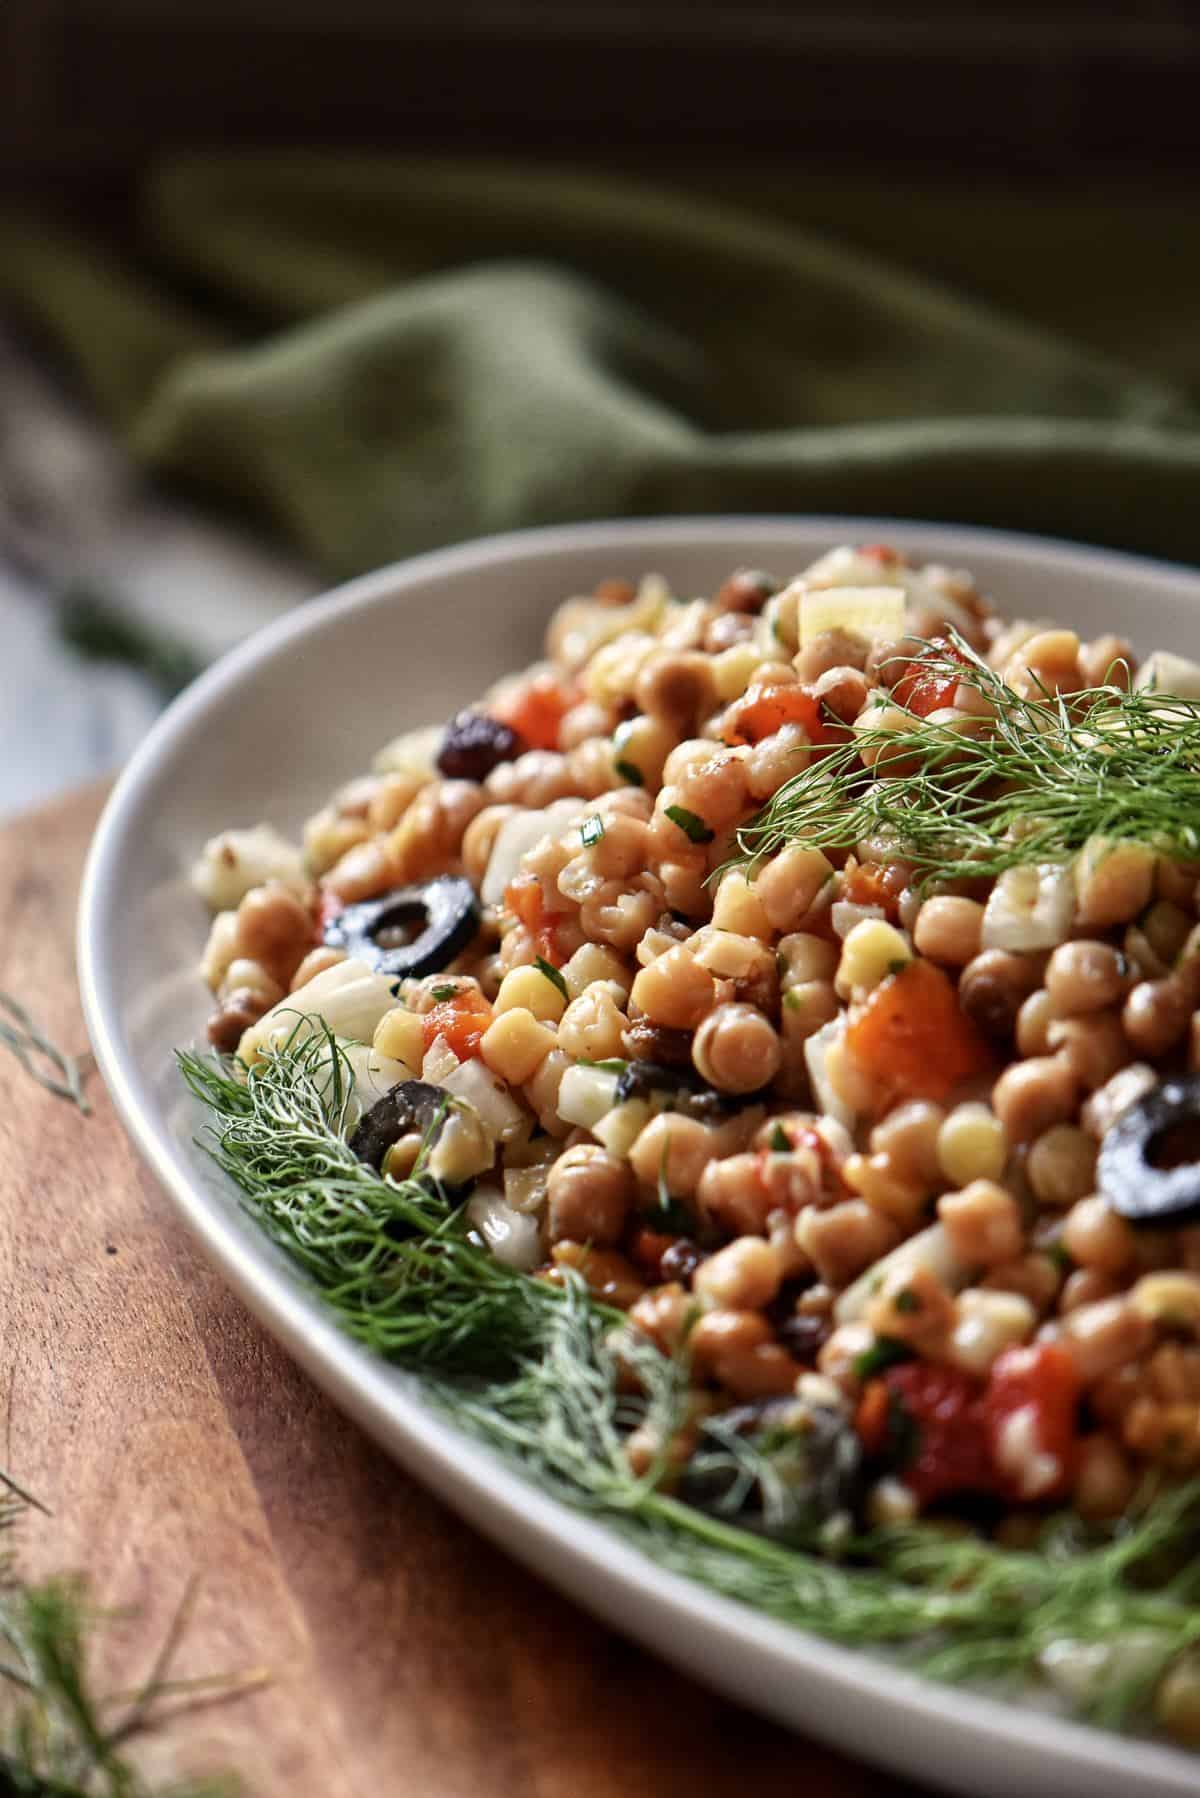 A close view of the Fregola Salad with Roasted Red Pepper.